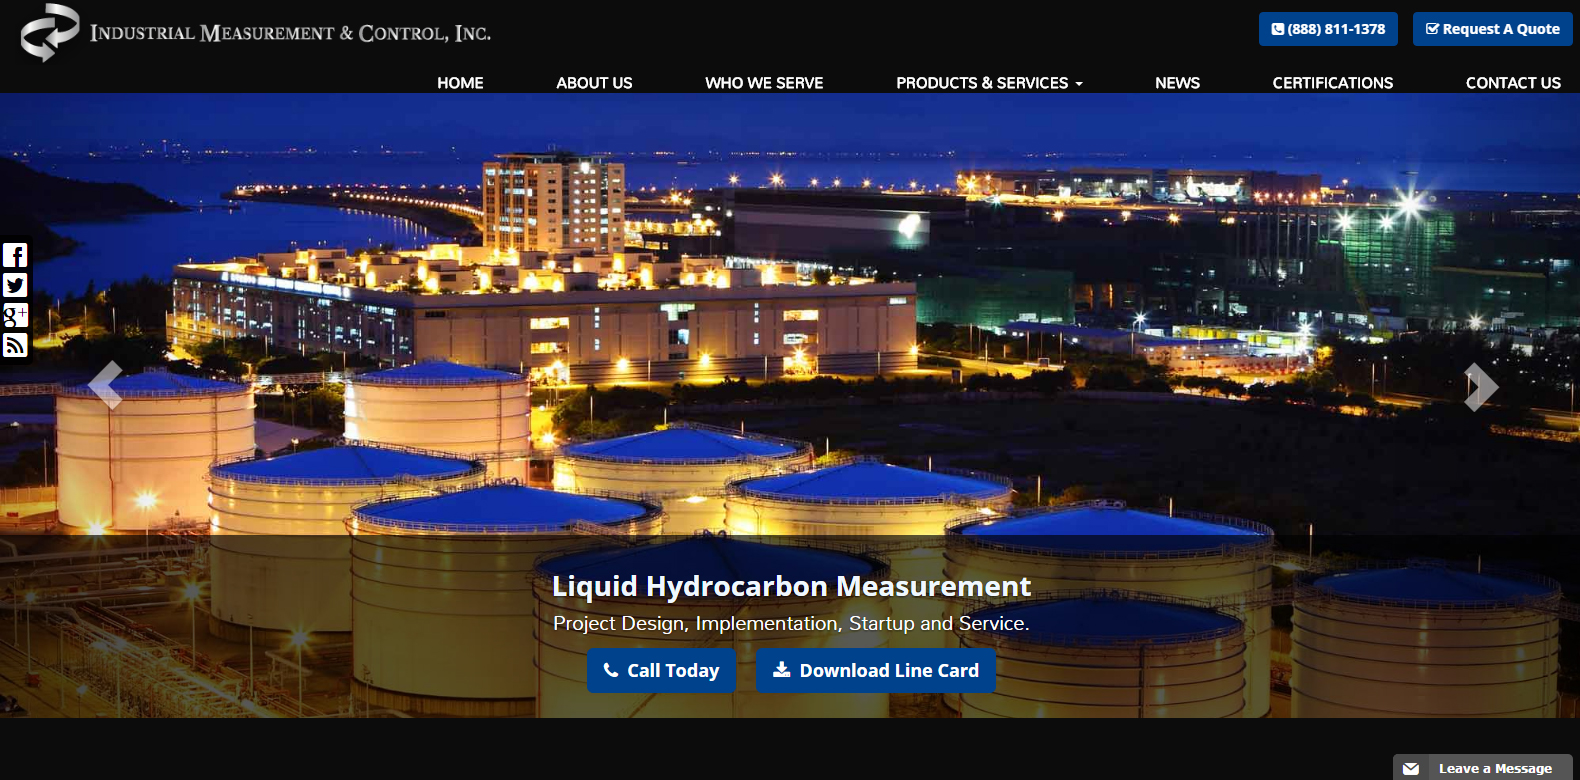 
New Website Launched: Industrial Measurement & Control